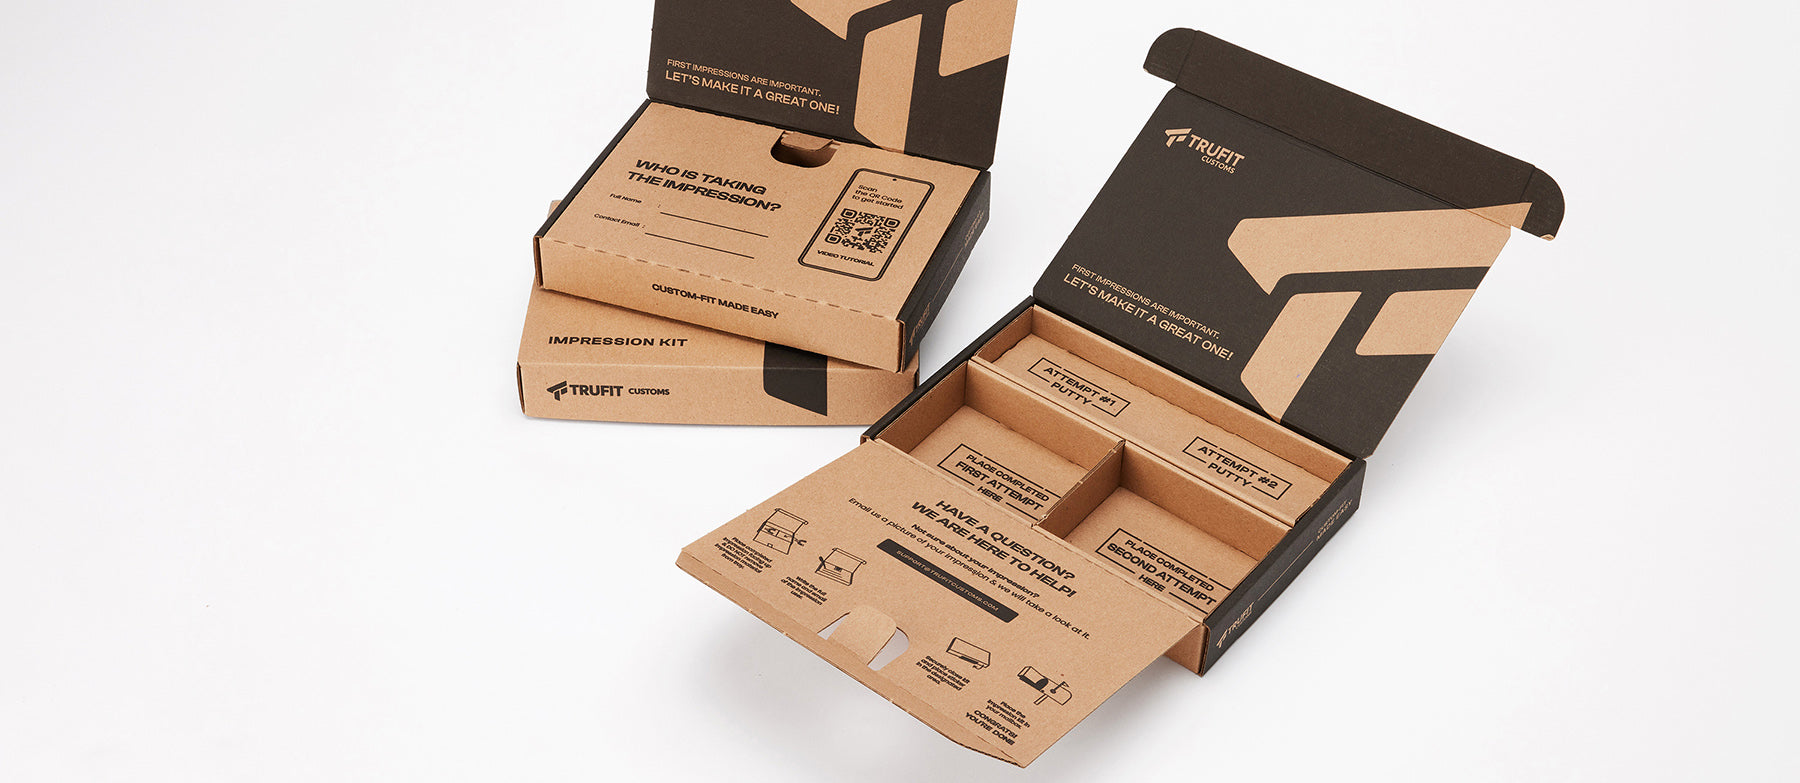 Flush Packaging can design the perfect custom shipping box for your e-commerce business